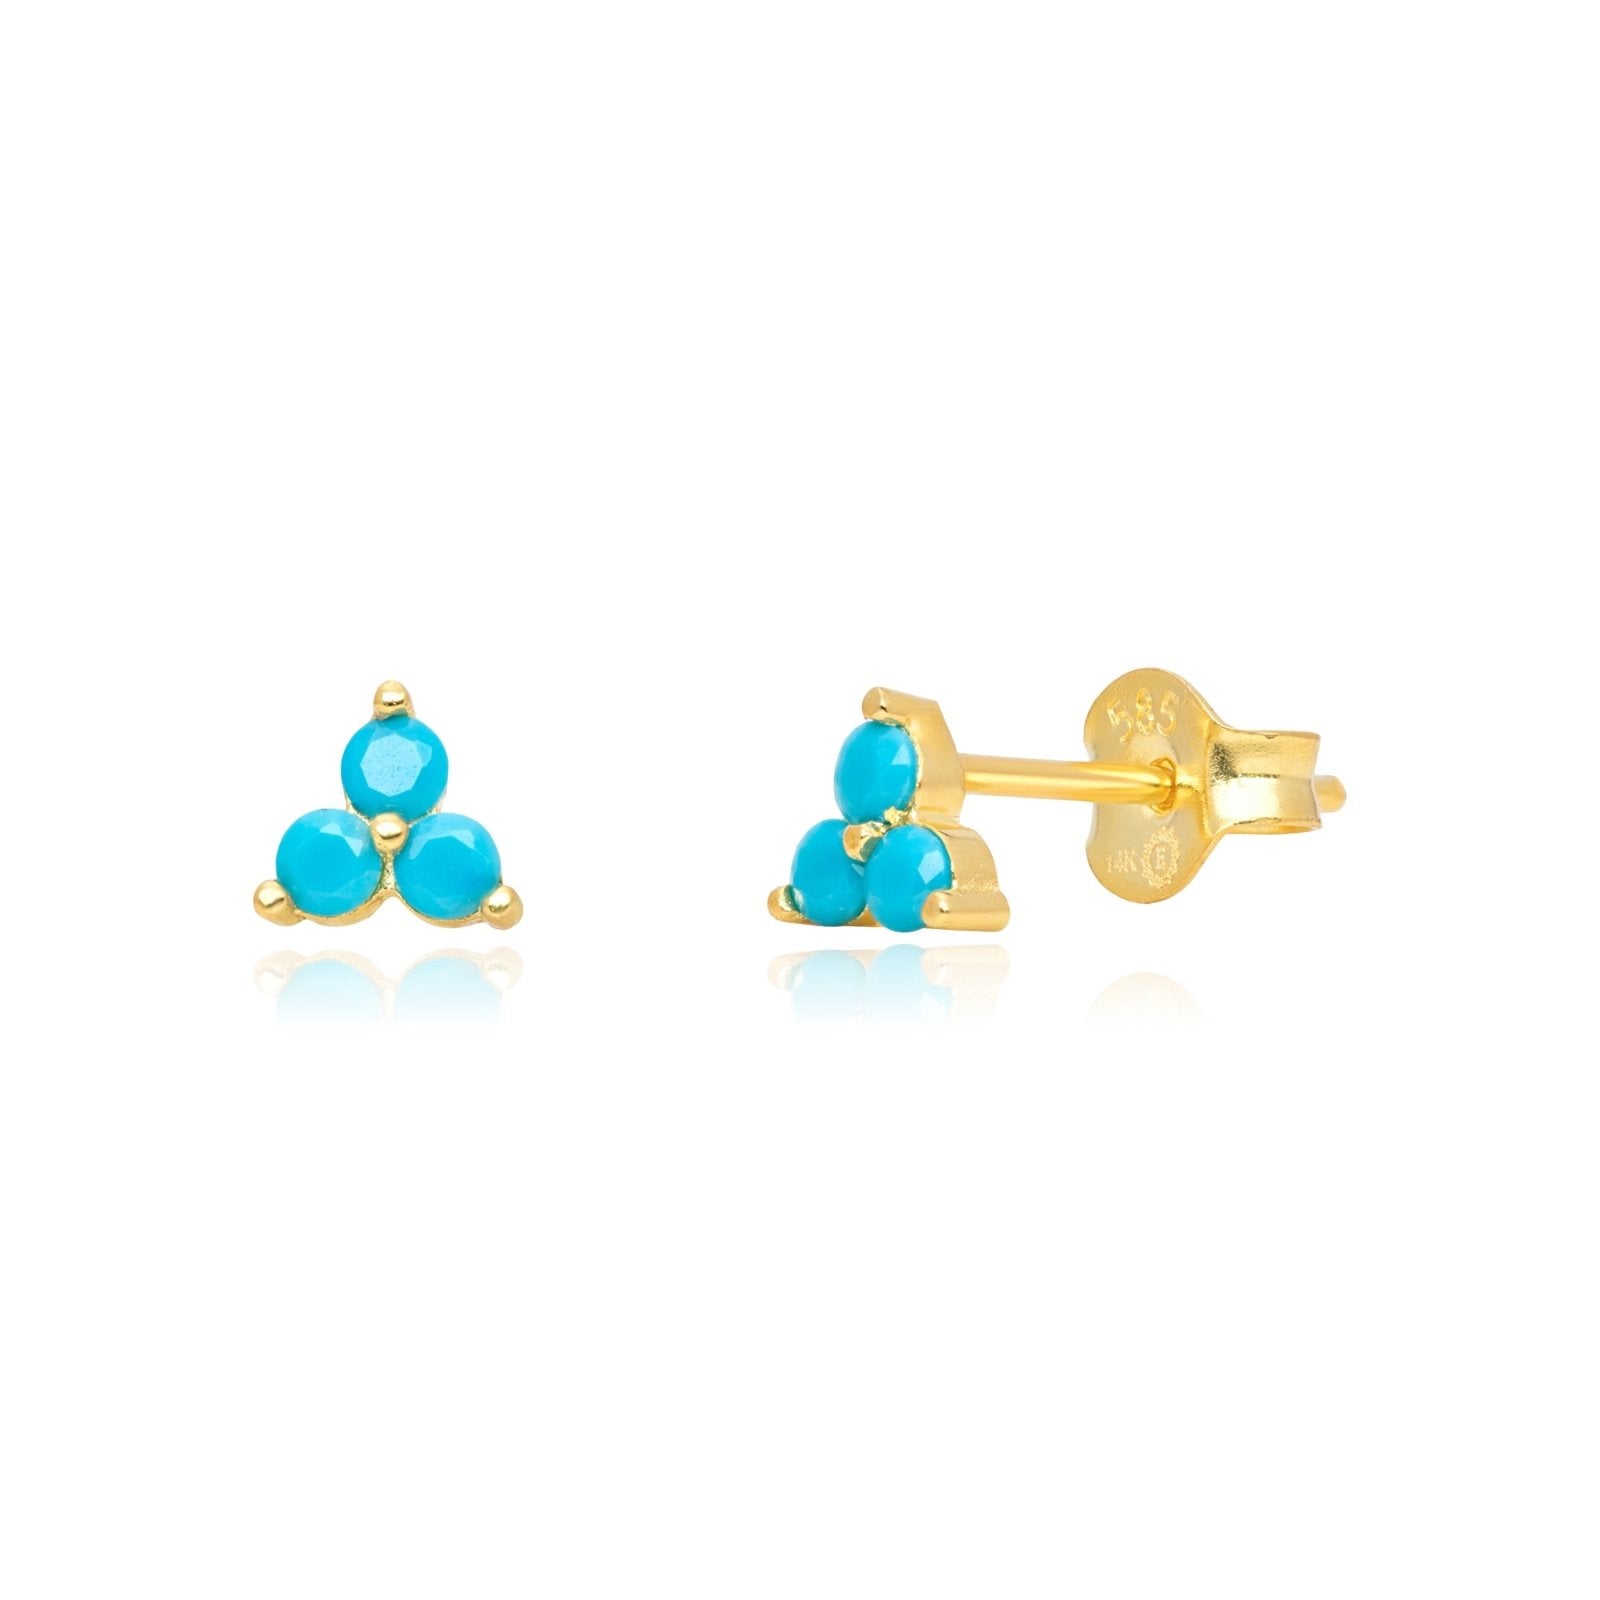 Turquoise Trinity Cluster Stud Earrings Earrings Estella Collection #product_description# 14k Birthstone Earrings #tag4# #tag5# #tag6# #tag7# #tag8# #tag9# #tag10#